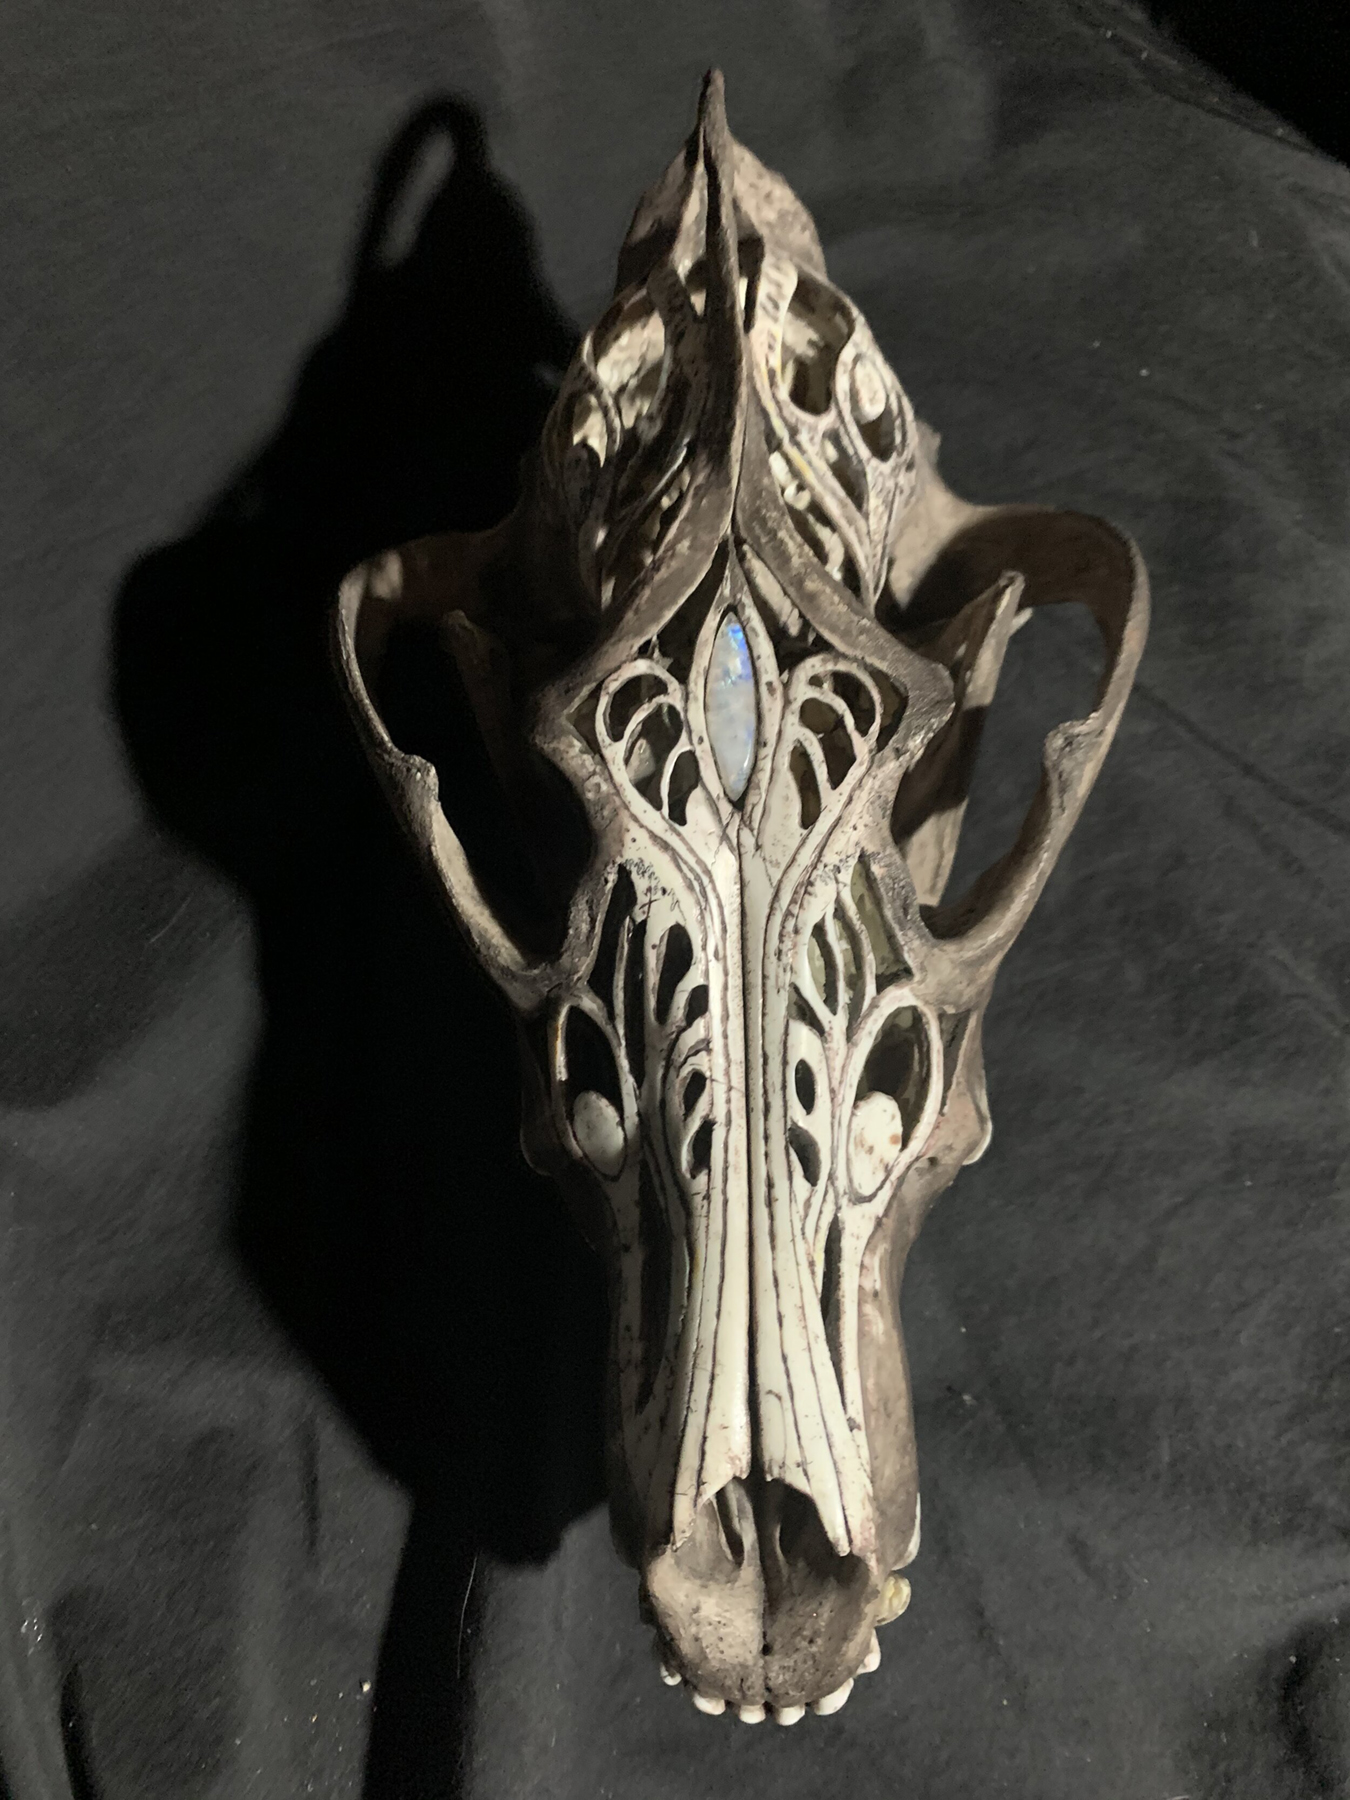 Carved wolf skull with an inlaid moonstone. Image courtesy of Indi Walter